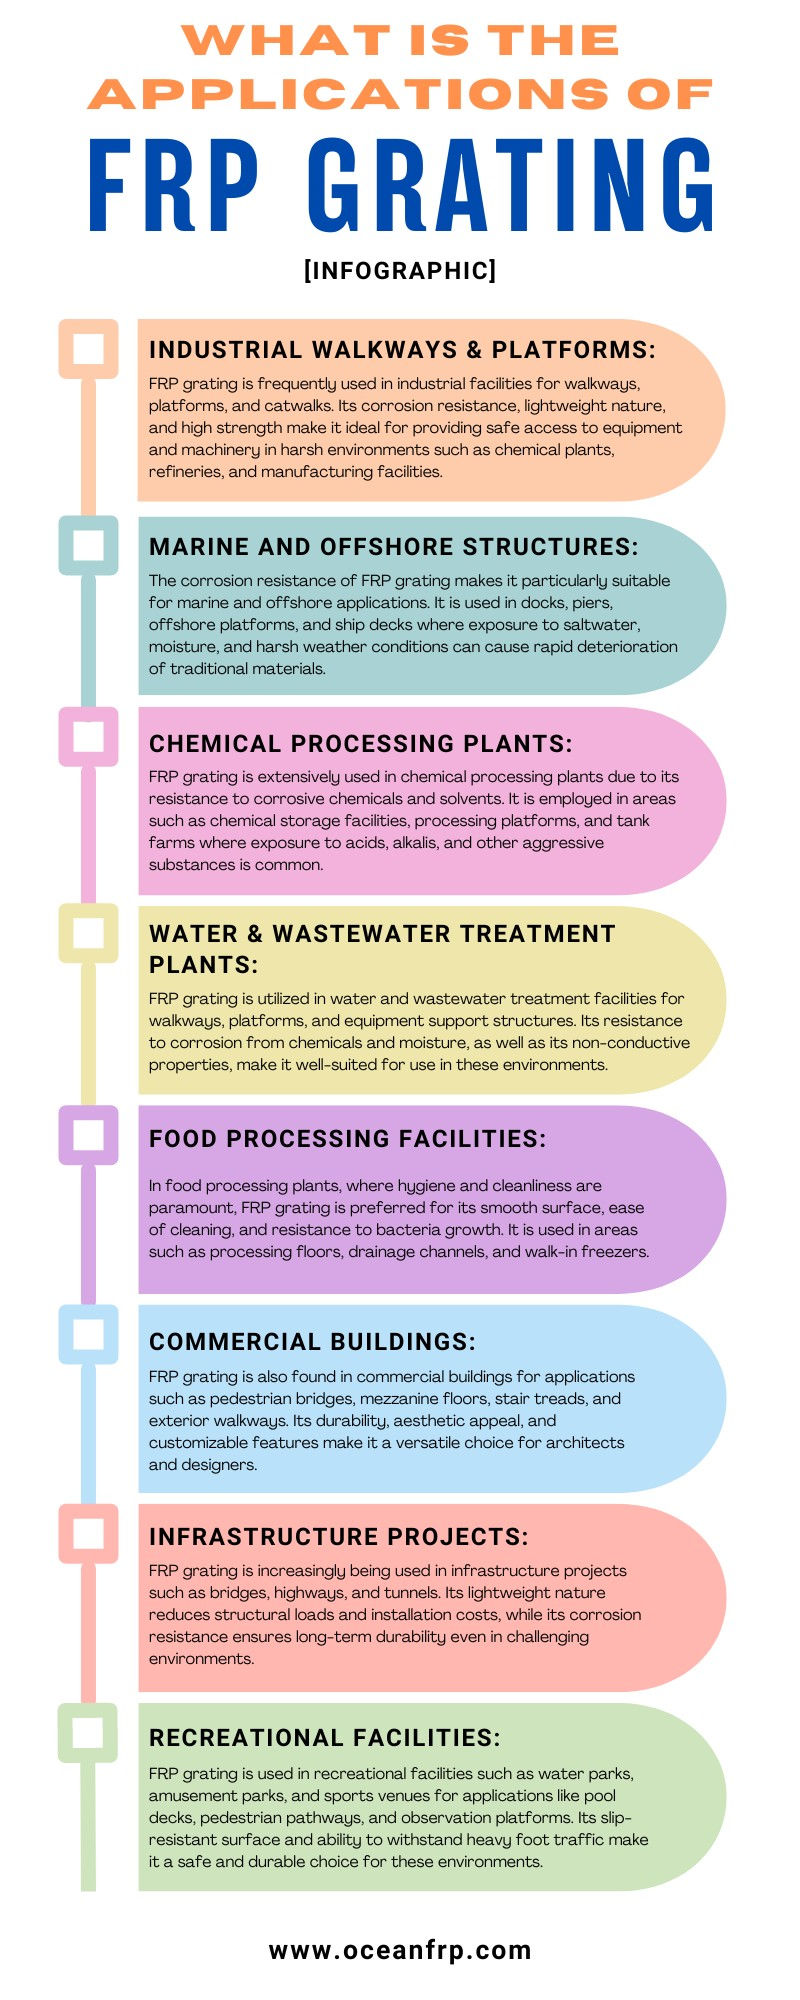 What is The Applications of FRP Grating [Infographic]